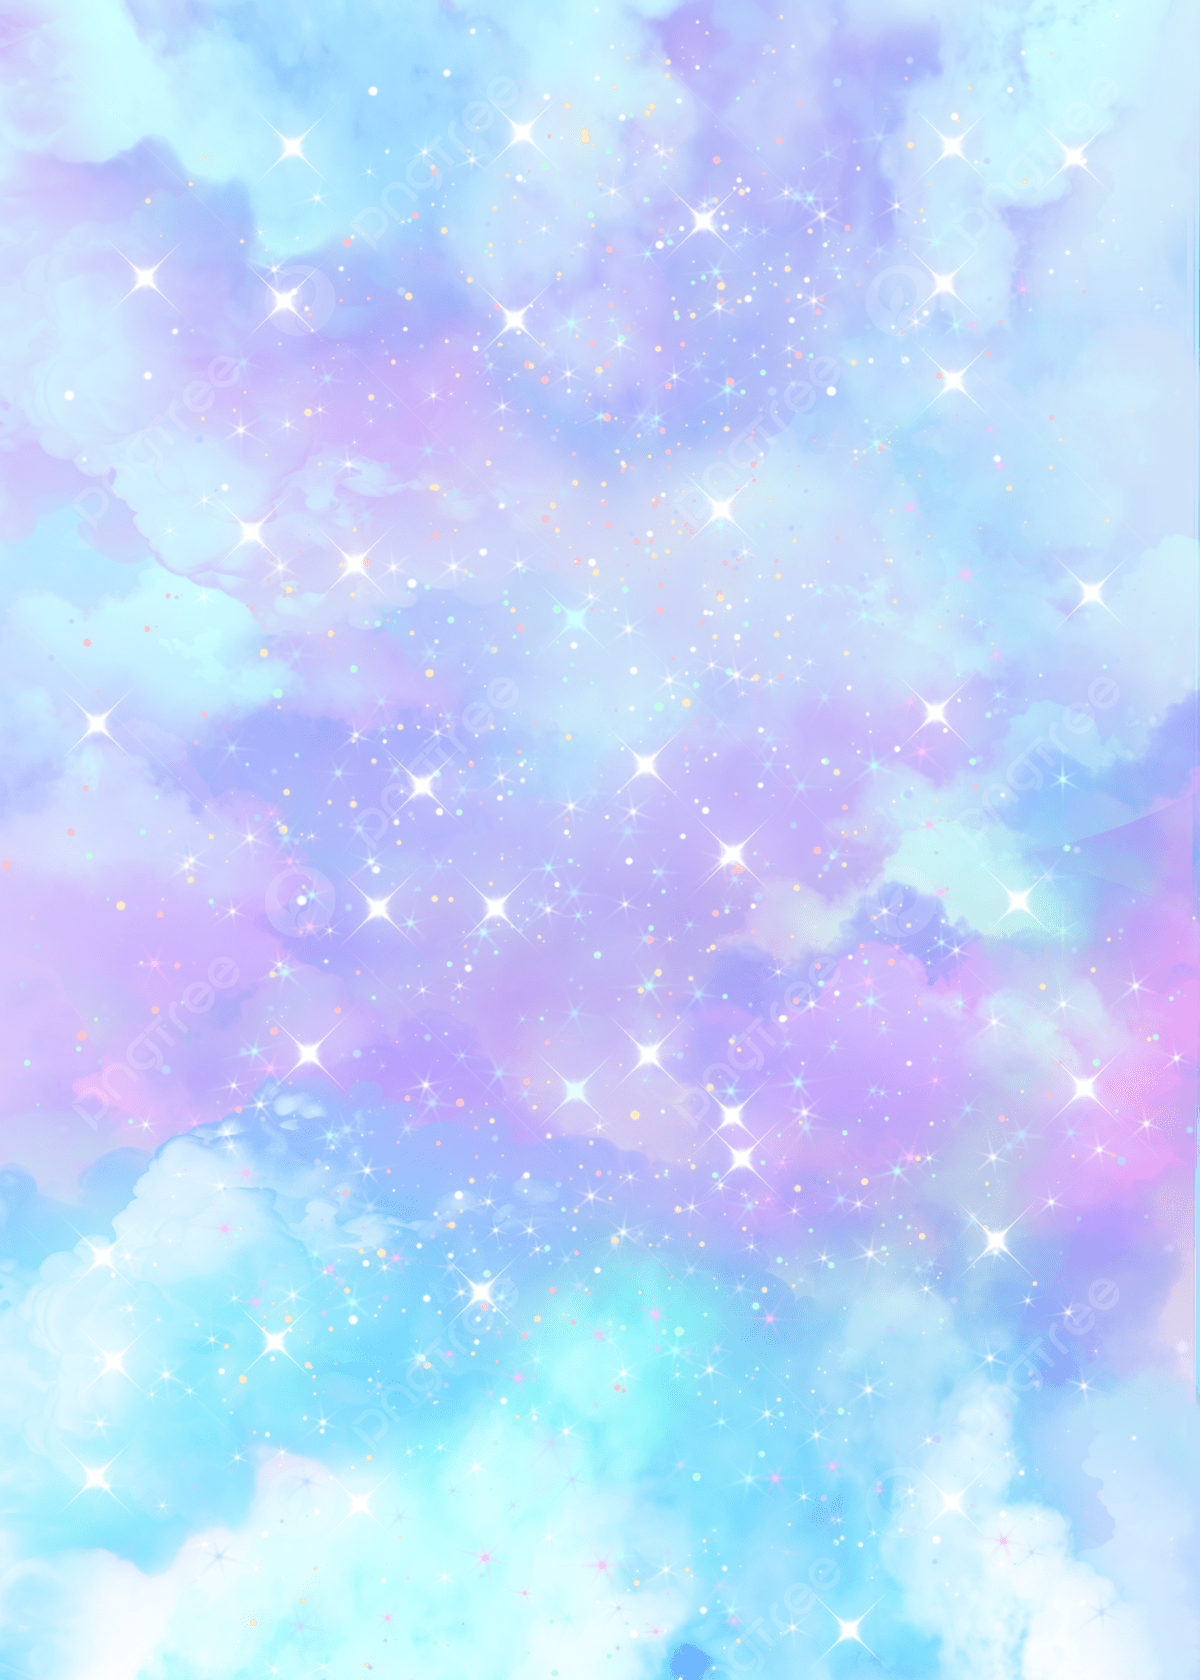 A digital painting of a purple and blue sky with white clouds and stars. - Holographic